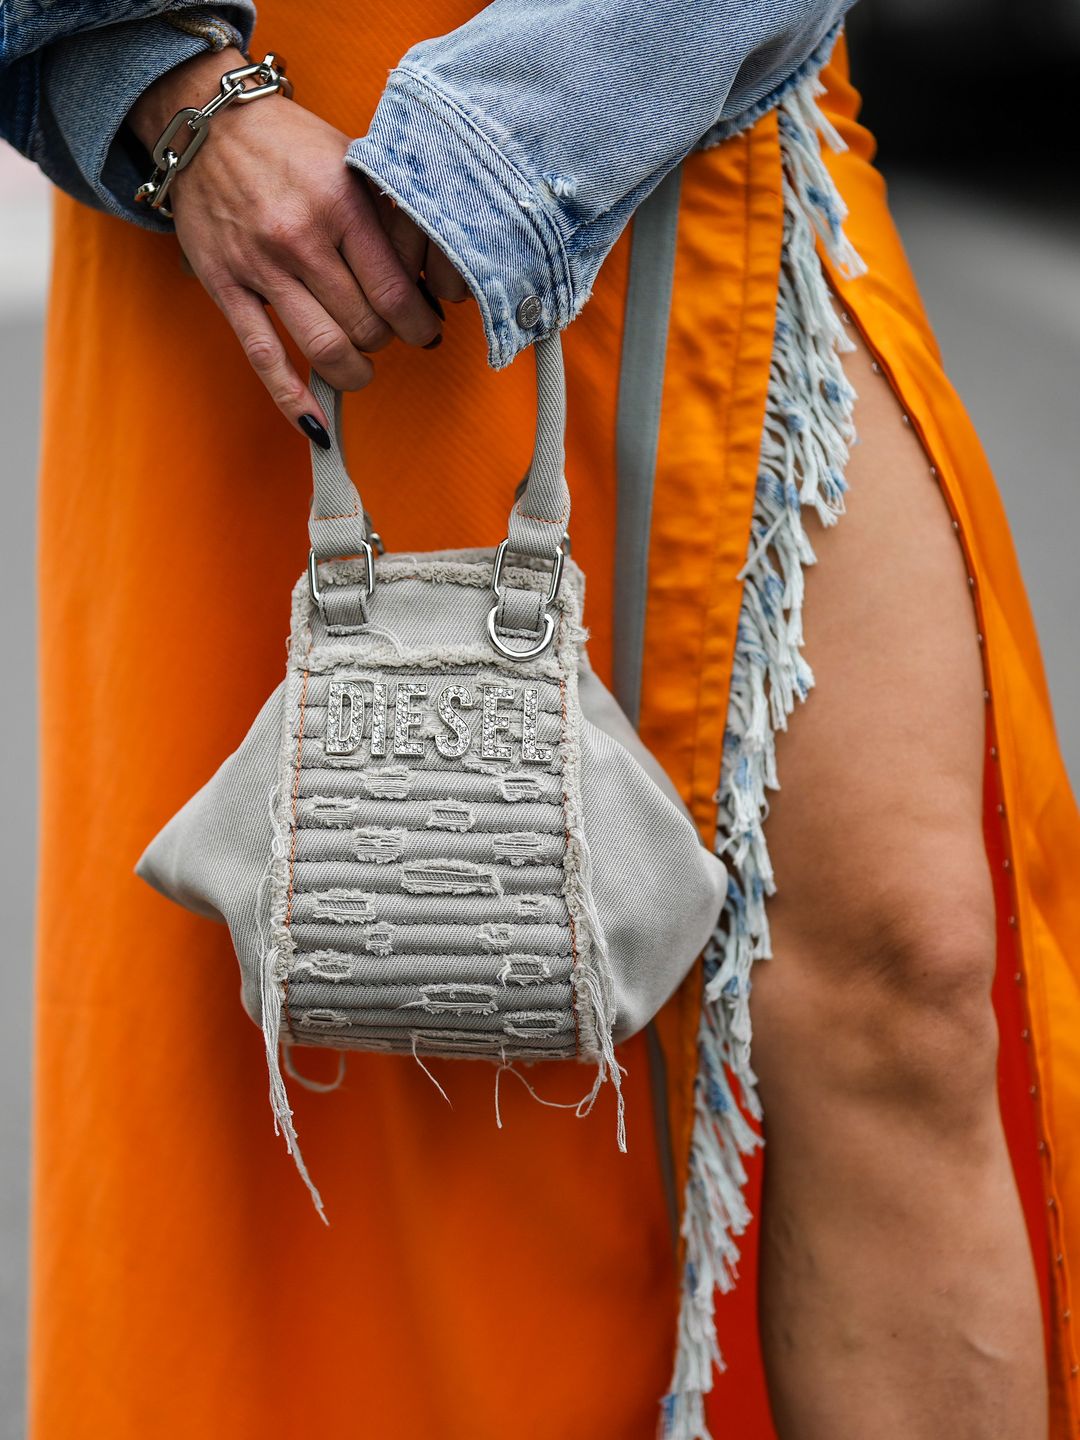 MILAN, ITALY - SEPTEMBER 21: A guest wears silver a pale gray denim ripped jacket from Diesel, an orange long dress with blue denim fringed borders, a beige denim / embroidered rhinestones handbag from Diesel, outside Diesel, during the Milan Fashion Week